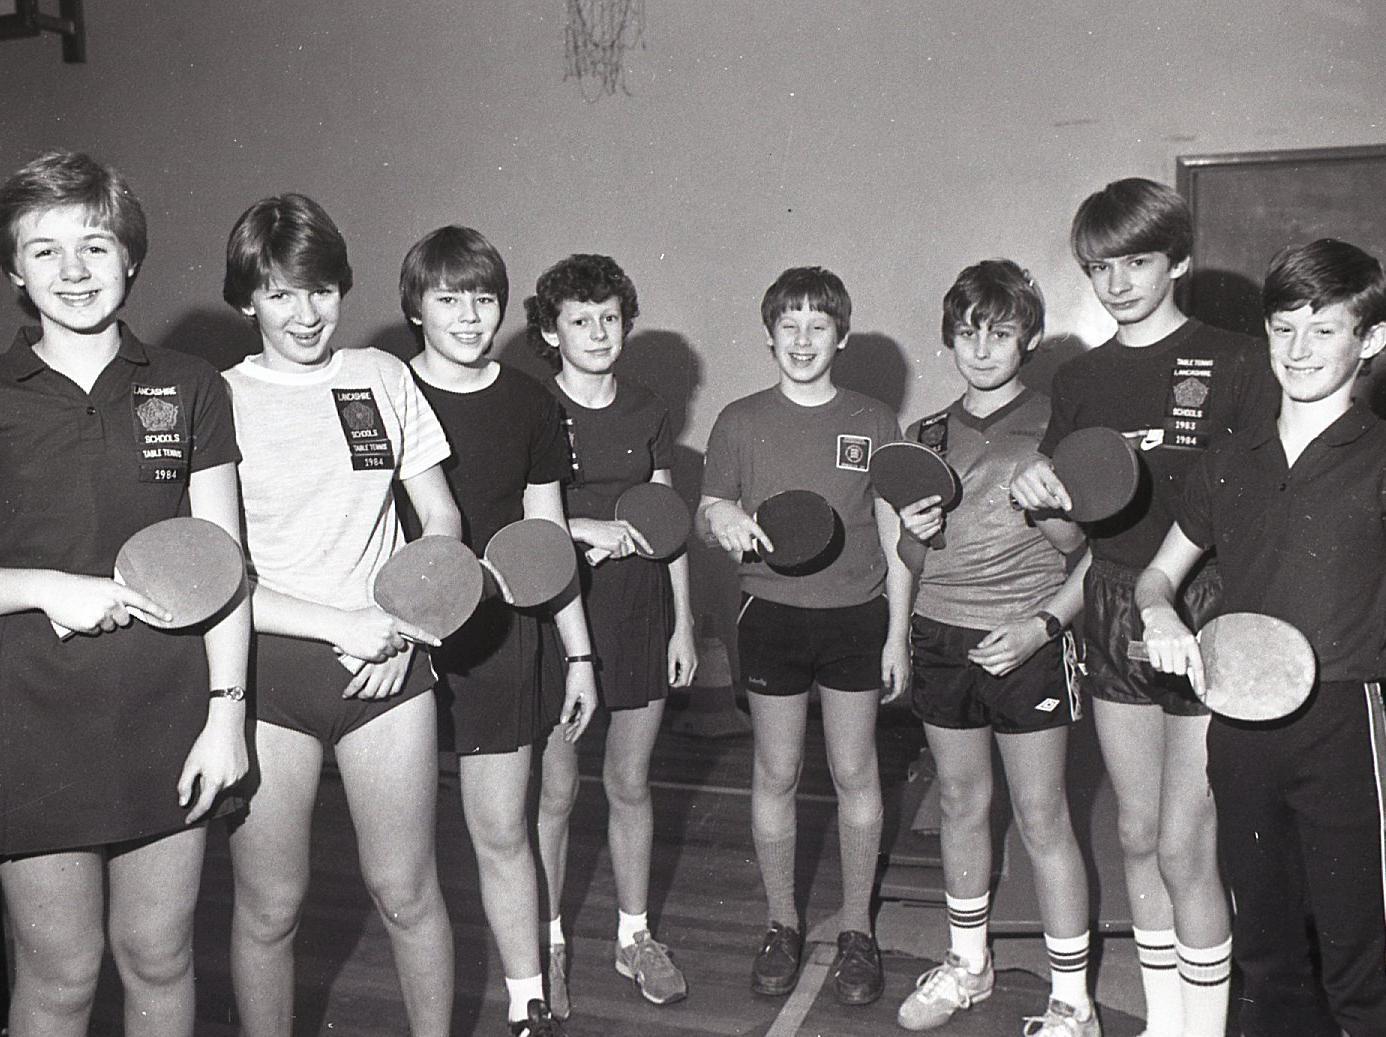 These eight table tennis players are hoping to put the North West on the map in a national competition. The pupils of Bishop Rawstorne C of E School, Croston, near Chorley, are through to the last dozen in the country. They are, from left to right, Louise Singleton, Caroline Moss, Jayne Green, Rebecca Davies, Andrew Eden, Terry Hoghton, Richard Singleton and Nicholas Golding